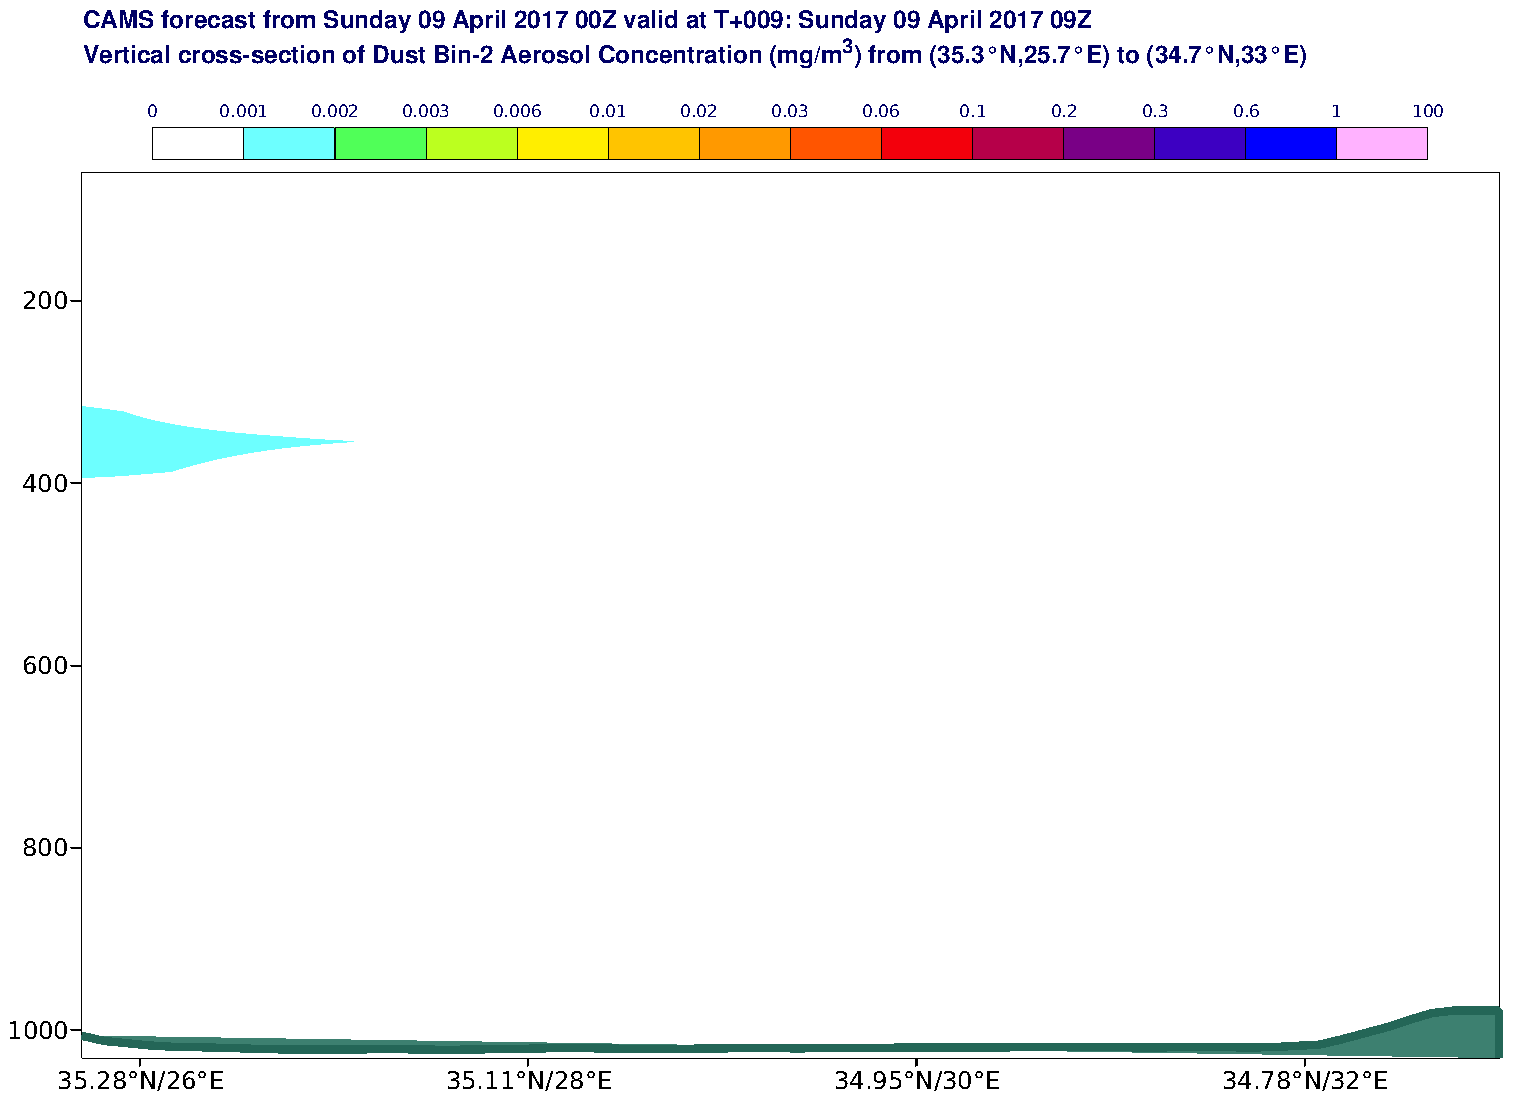 Vertical cross-section of Dust Bin-2 Aerosol Concentration (mg/m3) valid at T9 - 2017-04-09 09:00